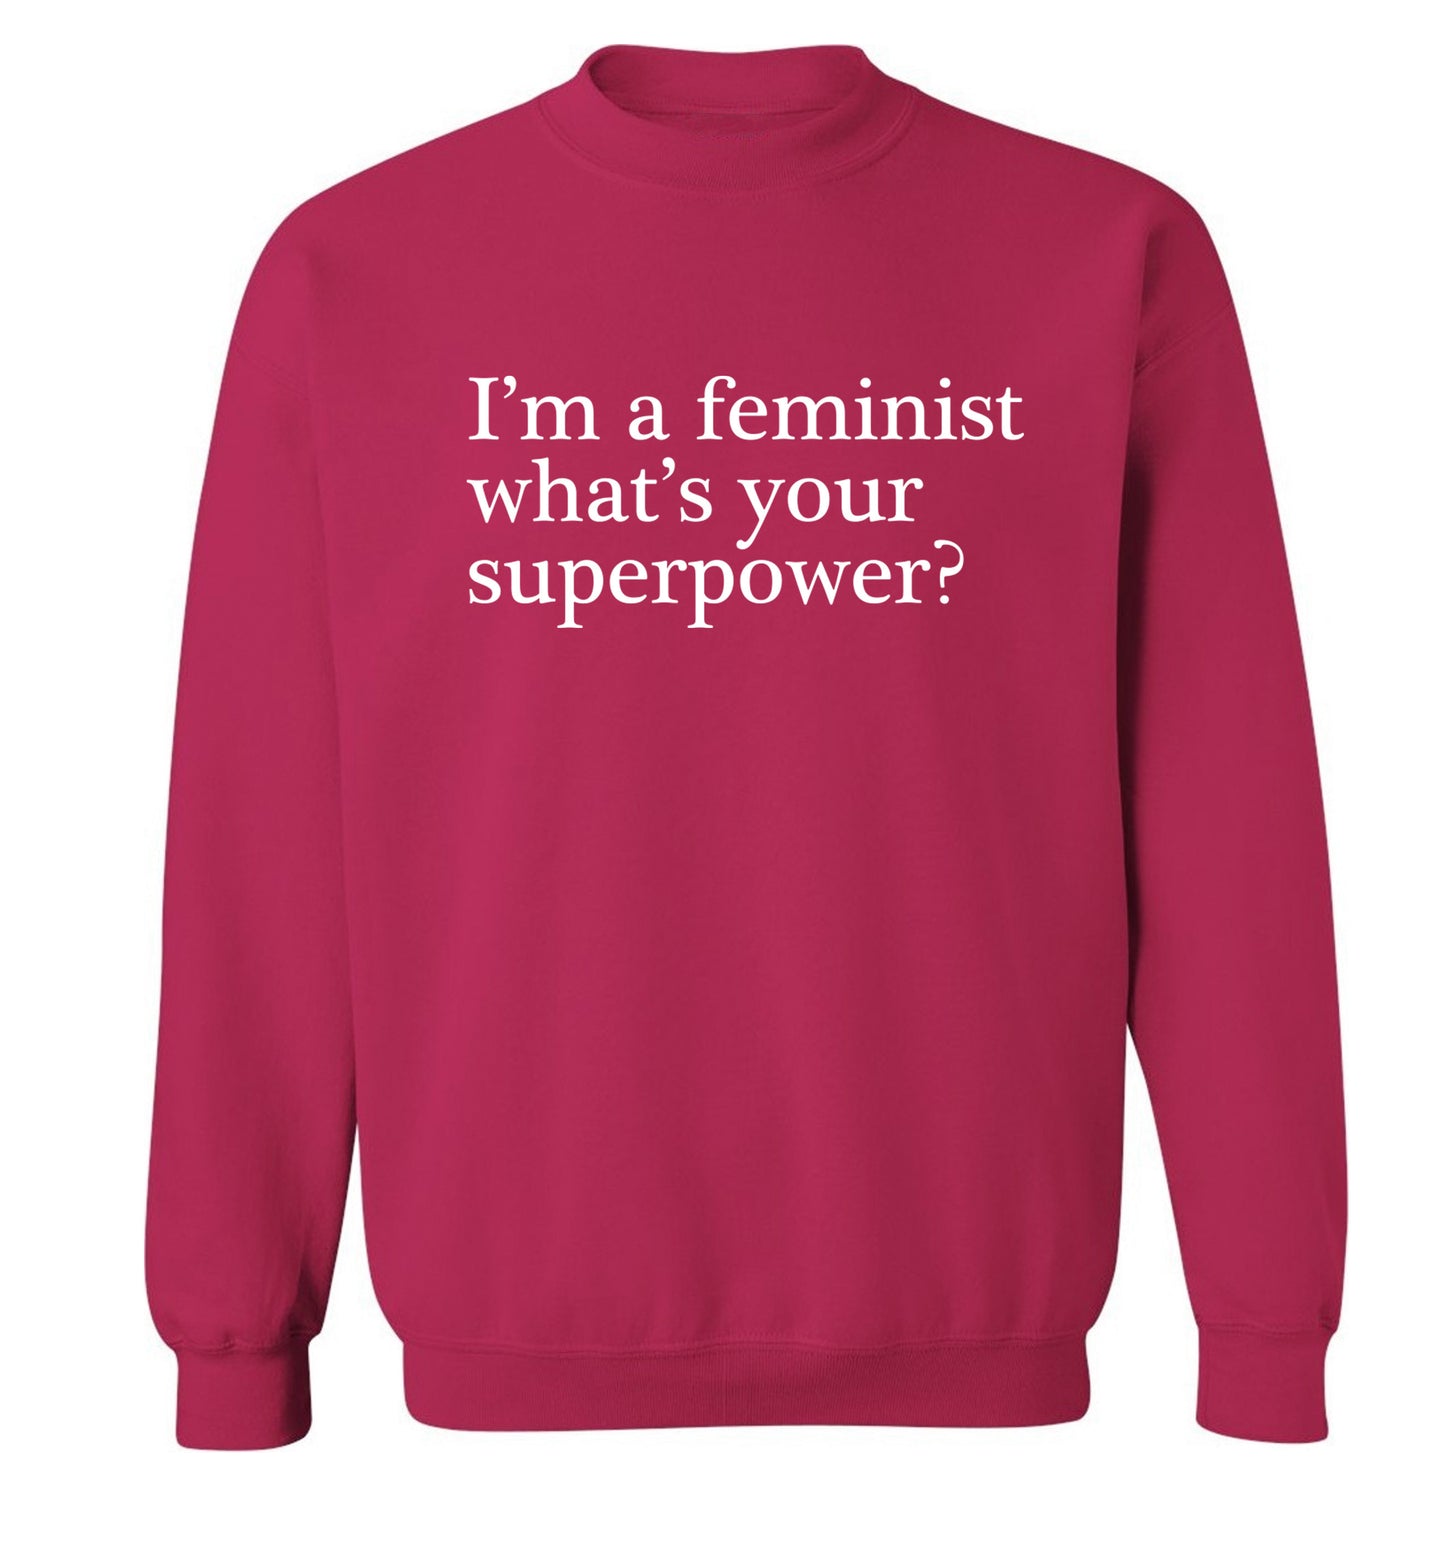 I'm a feminist what's your superpower? Adult's unisex pink Sweater 2XL